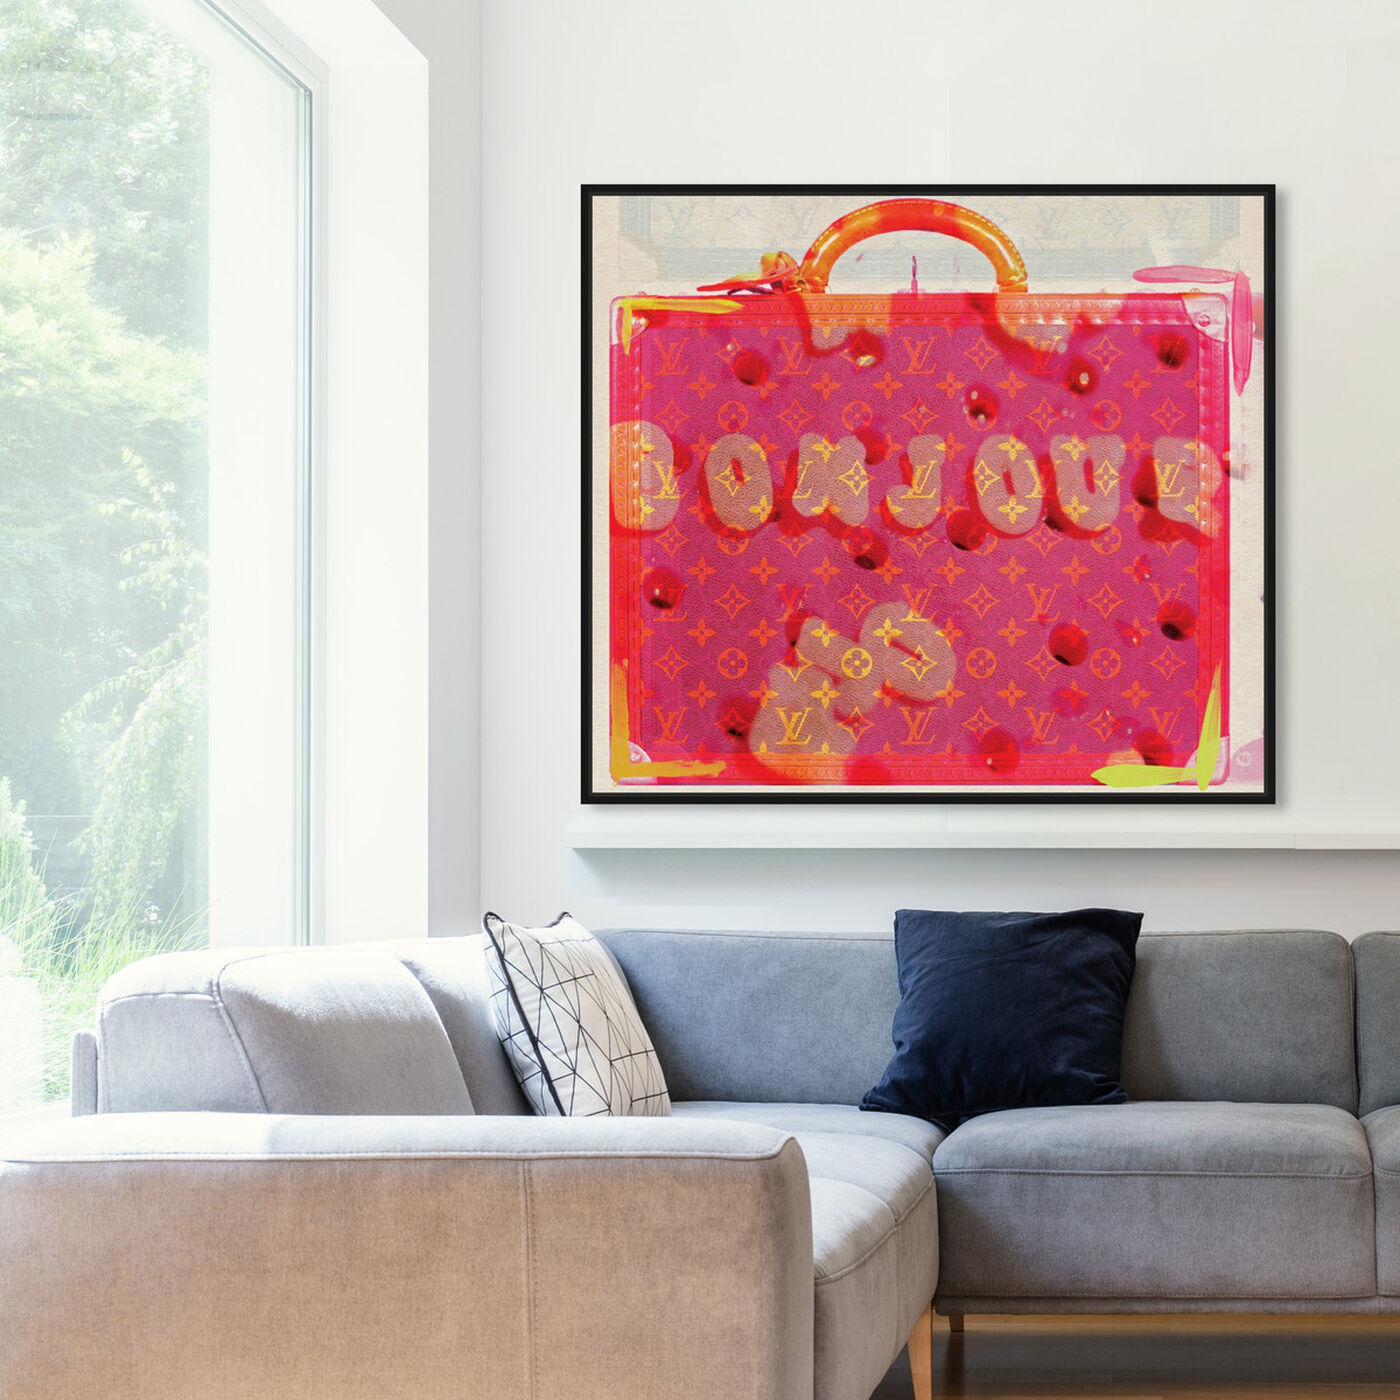 Hanging view of Bonjour featuring fashion and glam and handbags art.